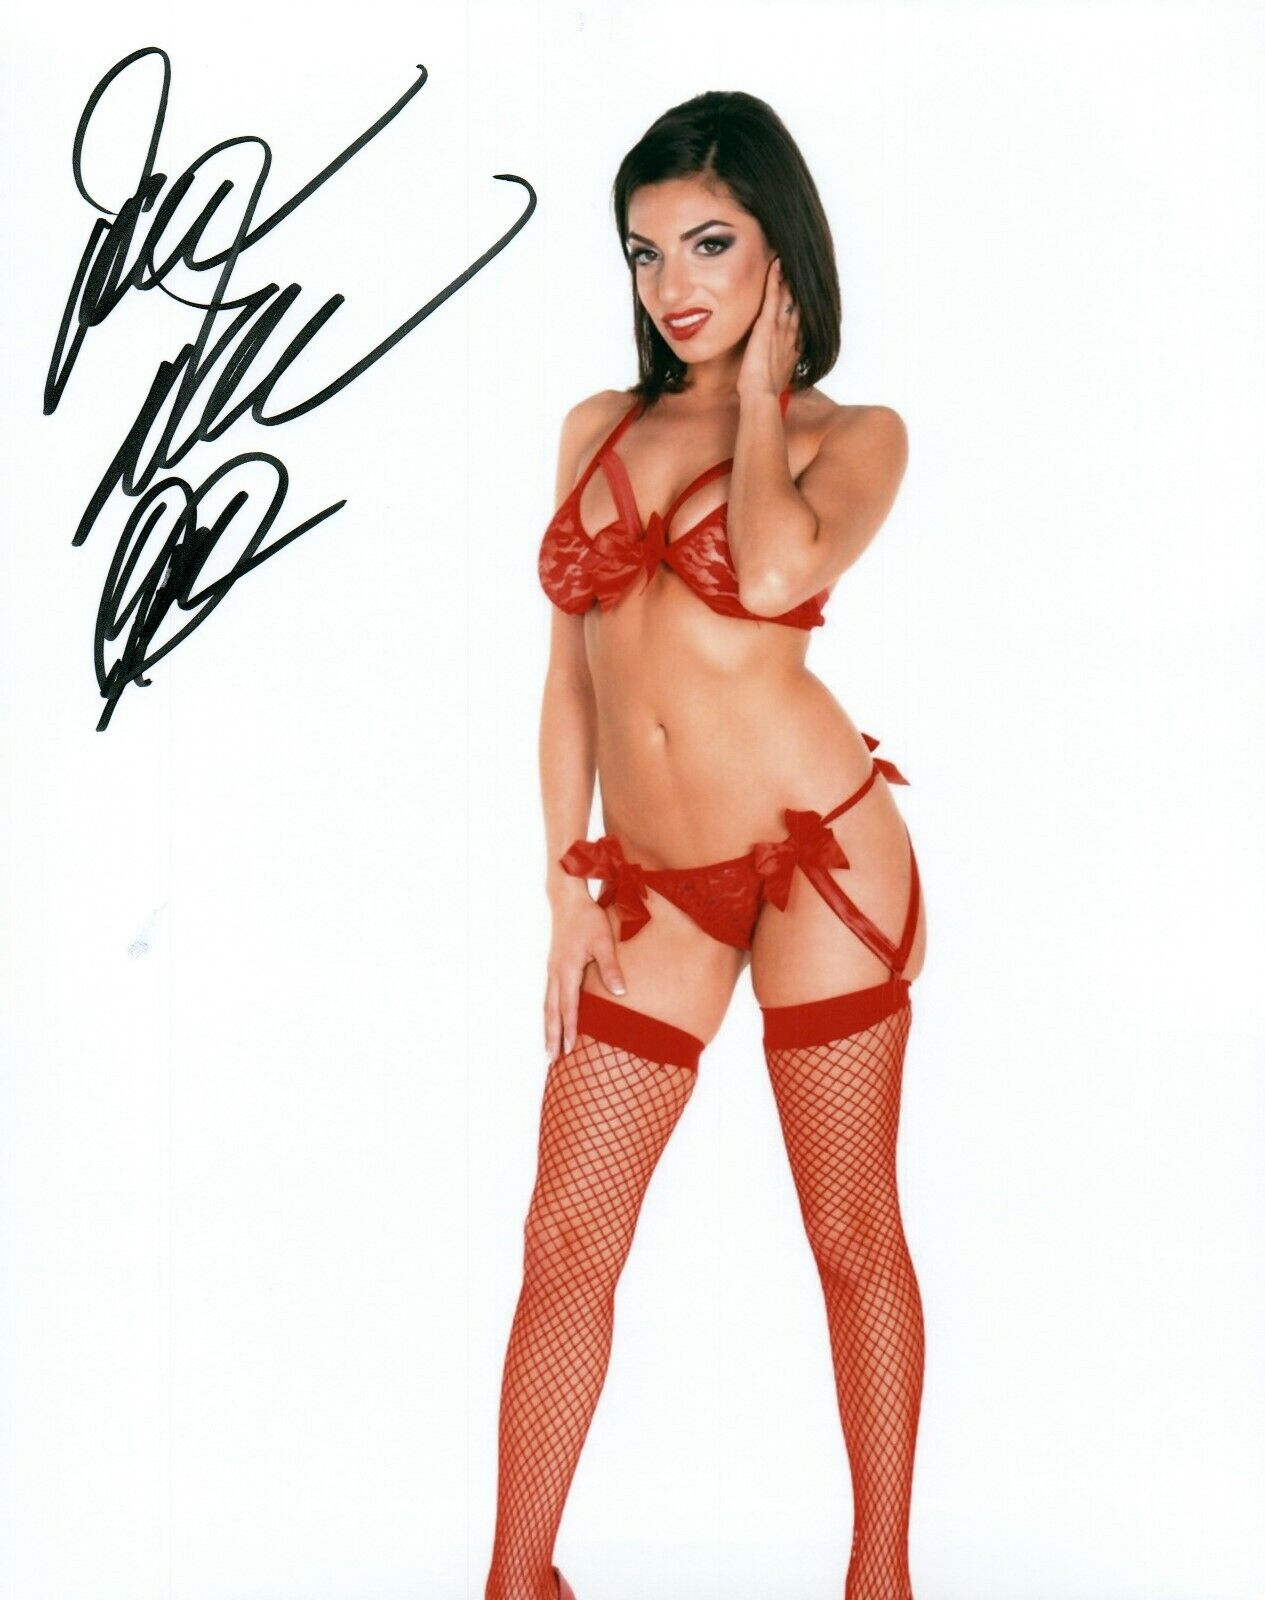 Darcie Dolce Red Lingerie Sexy Adult Model Signed 8x10 Photo Poster painting COA Proof 48A